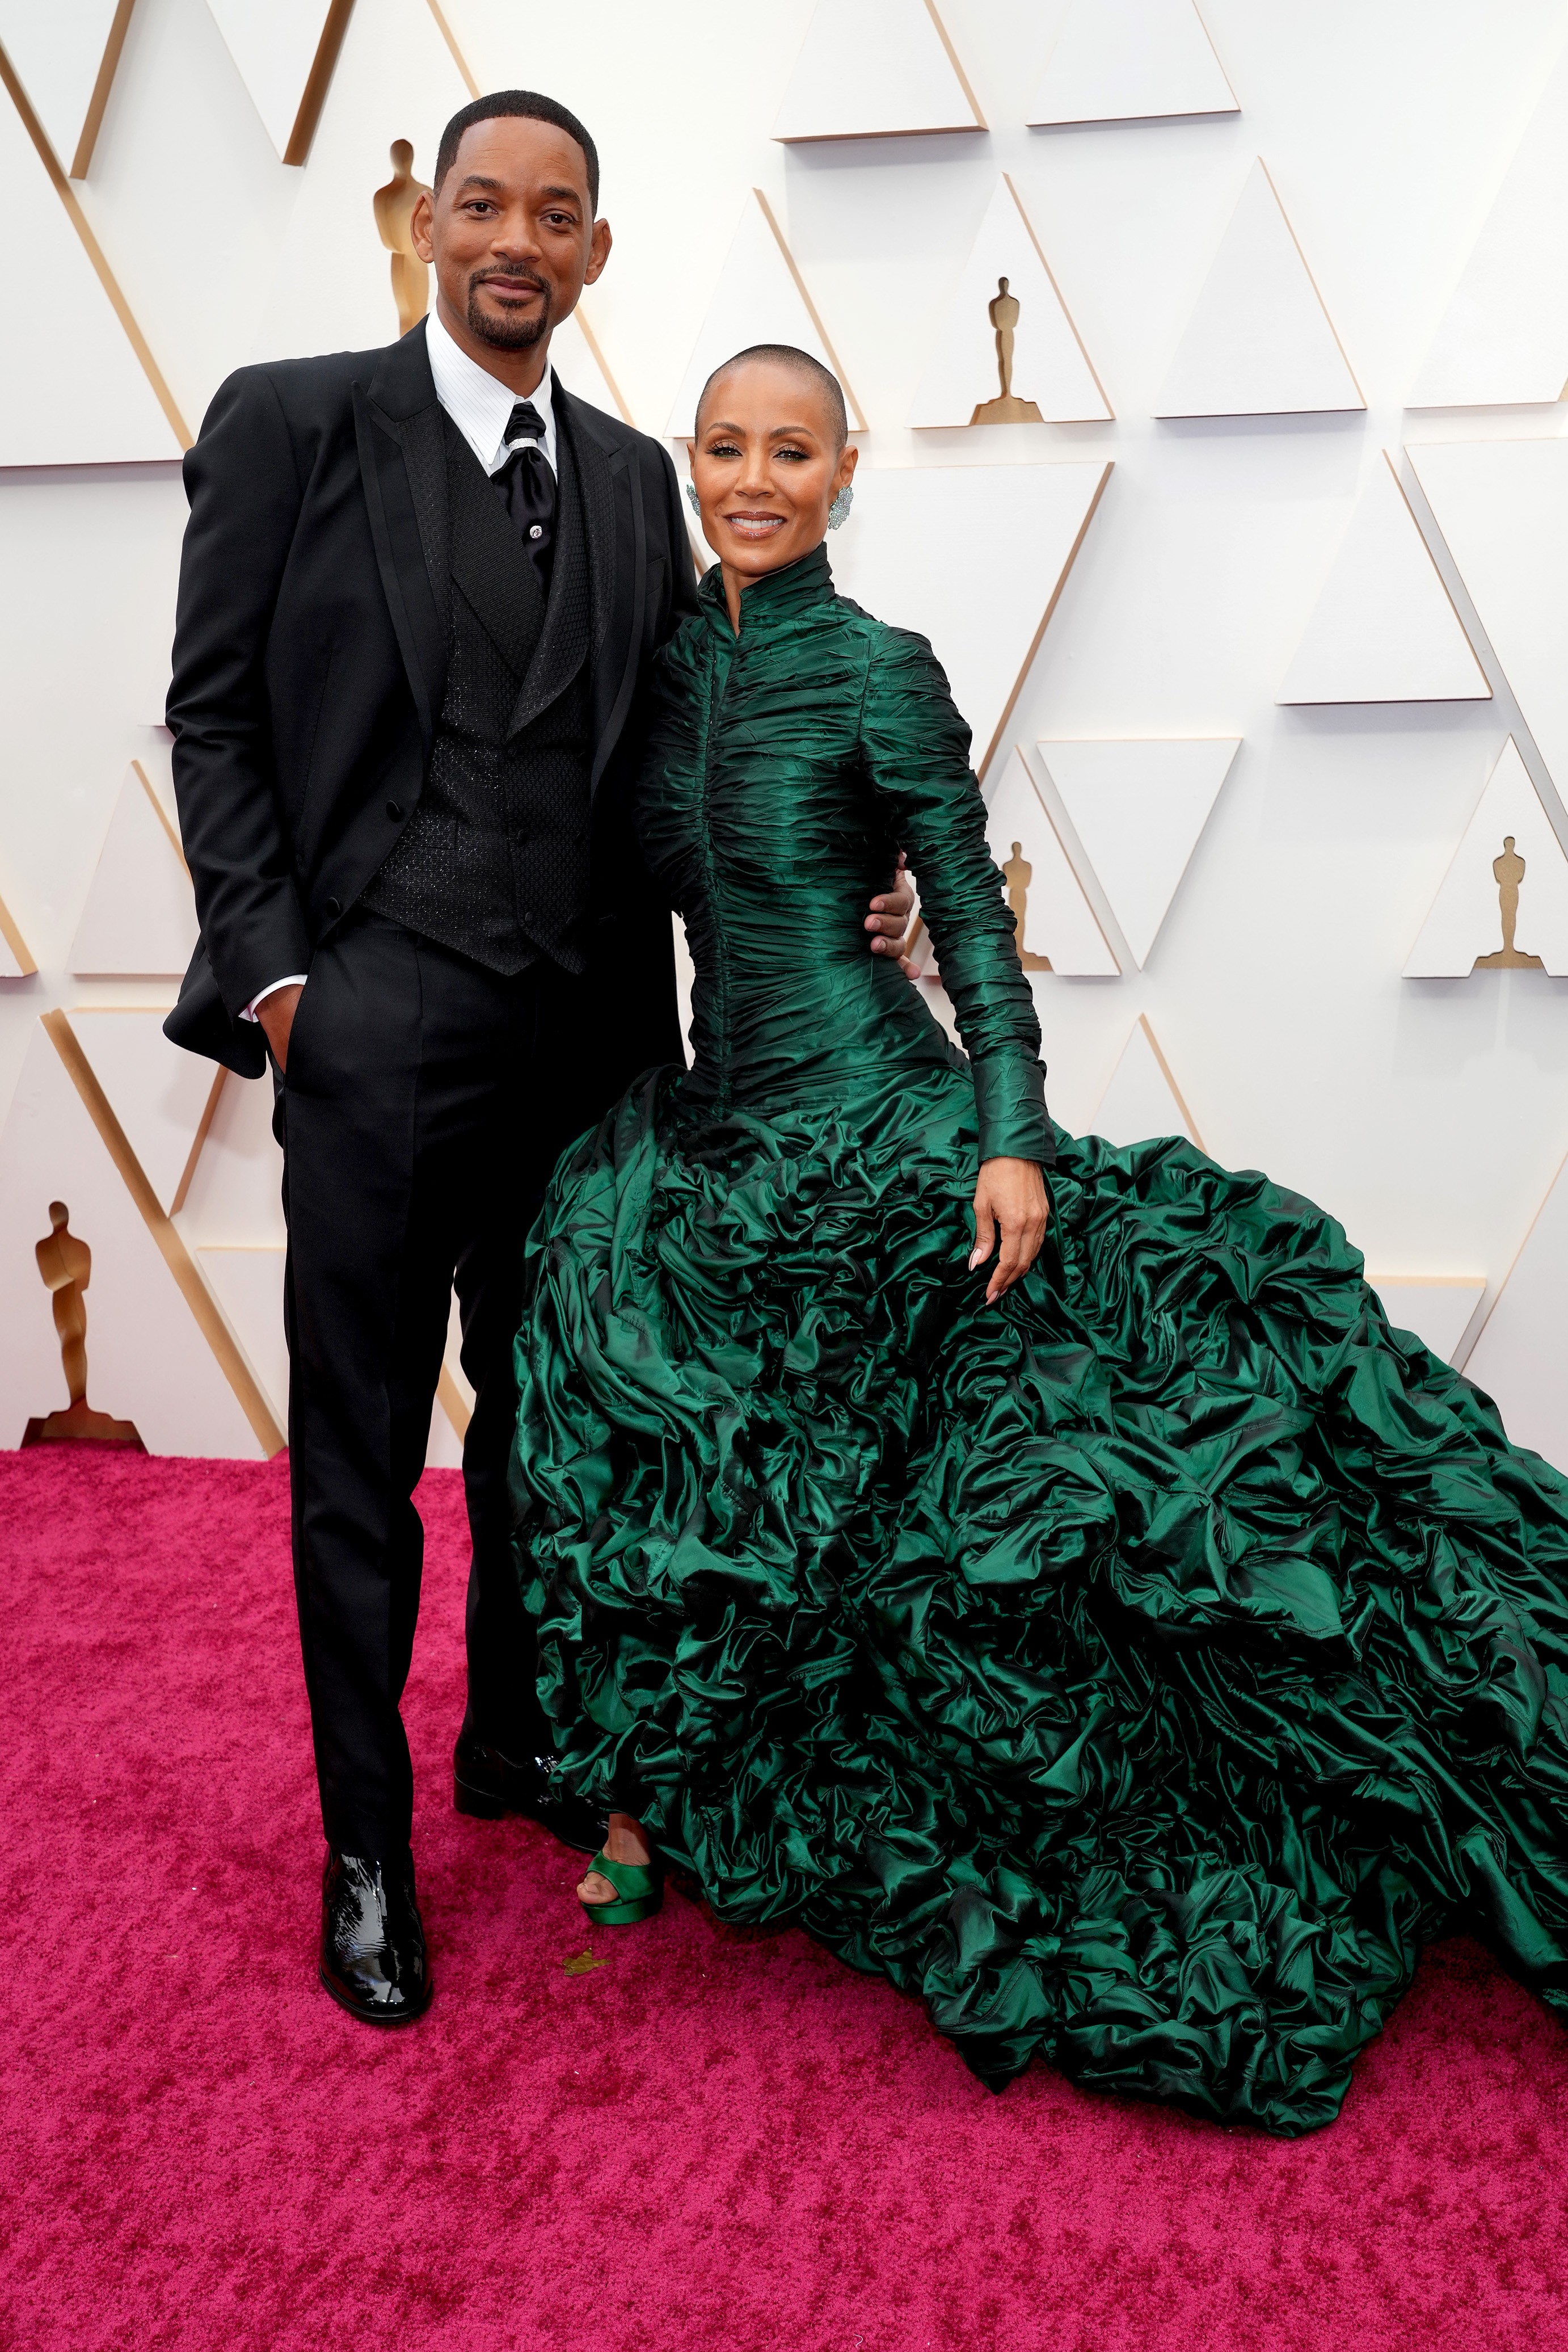 HOLLYWOOD, CALIFORNIA - MARCH 27: (L-R) Will Smith and Jada Pinkett Smith attend the 94th Annual Academy Awards at Hollywood and Highland on March 27, 2022 in Hollywood, California. (Photo by Kevin Mazur/WireImage) (Foto: WireImage,)